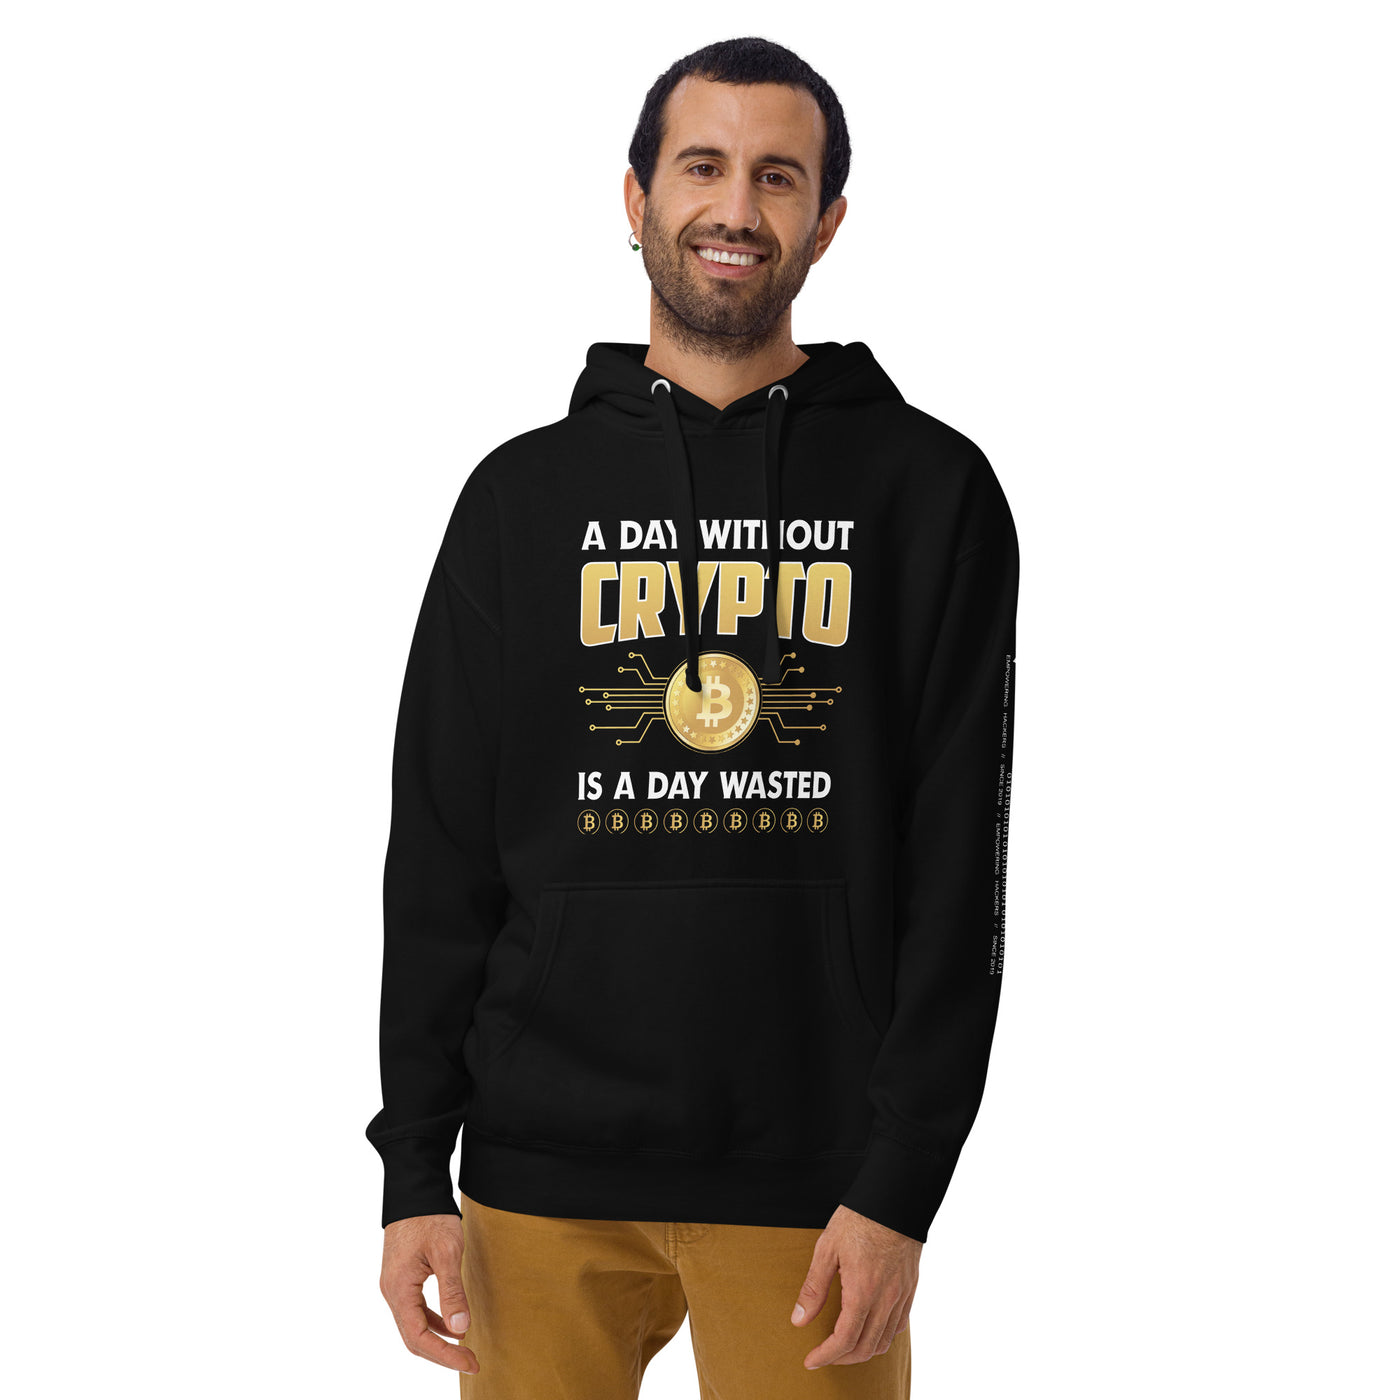 A day without Crypto is a day wasted  Unisex Hoodie